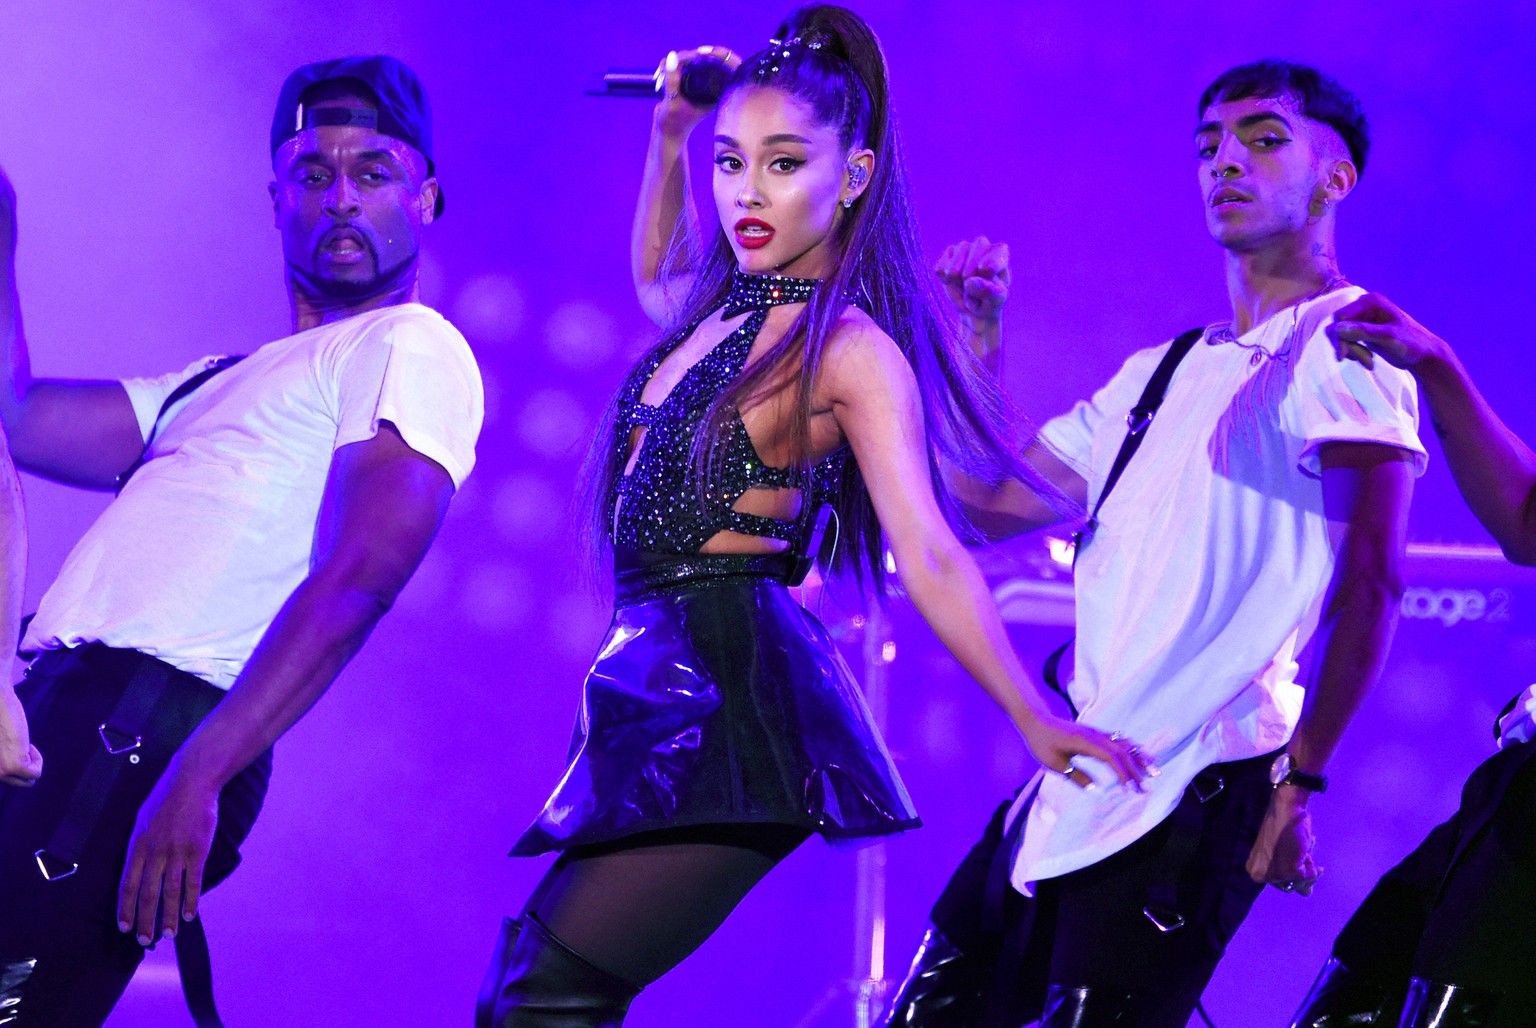 FILE - In this June 2, 2018 file photo, Ariana Grande, center, performs at Wango Tango in Los Angeles. Grande won her first Grammy Award on Sunday, Feb. 10, but the singer didn’t collect it after she  ...